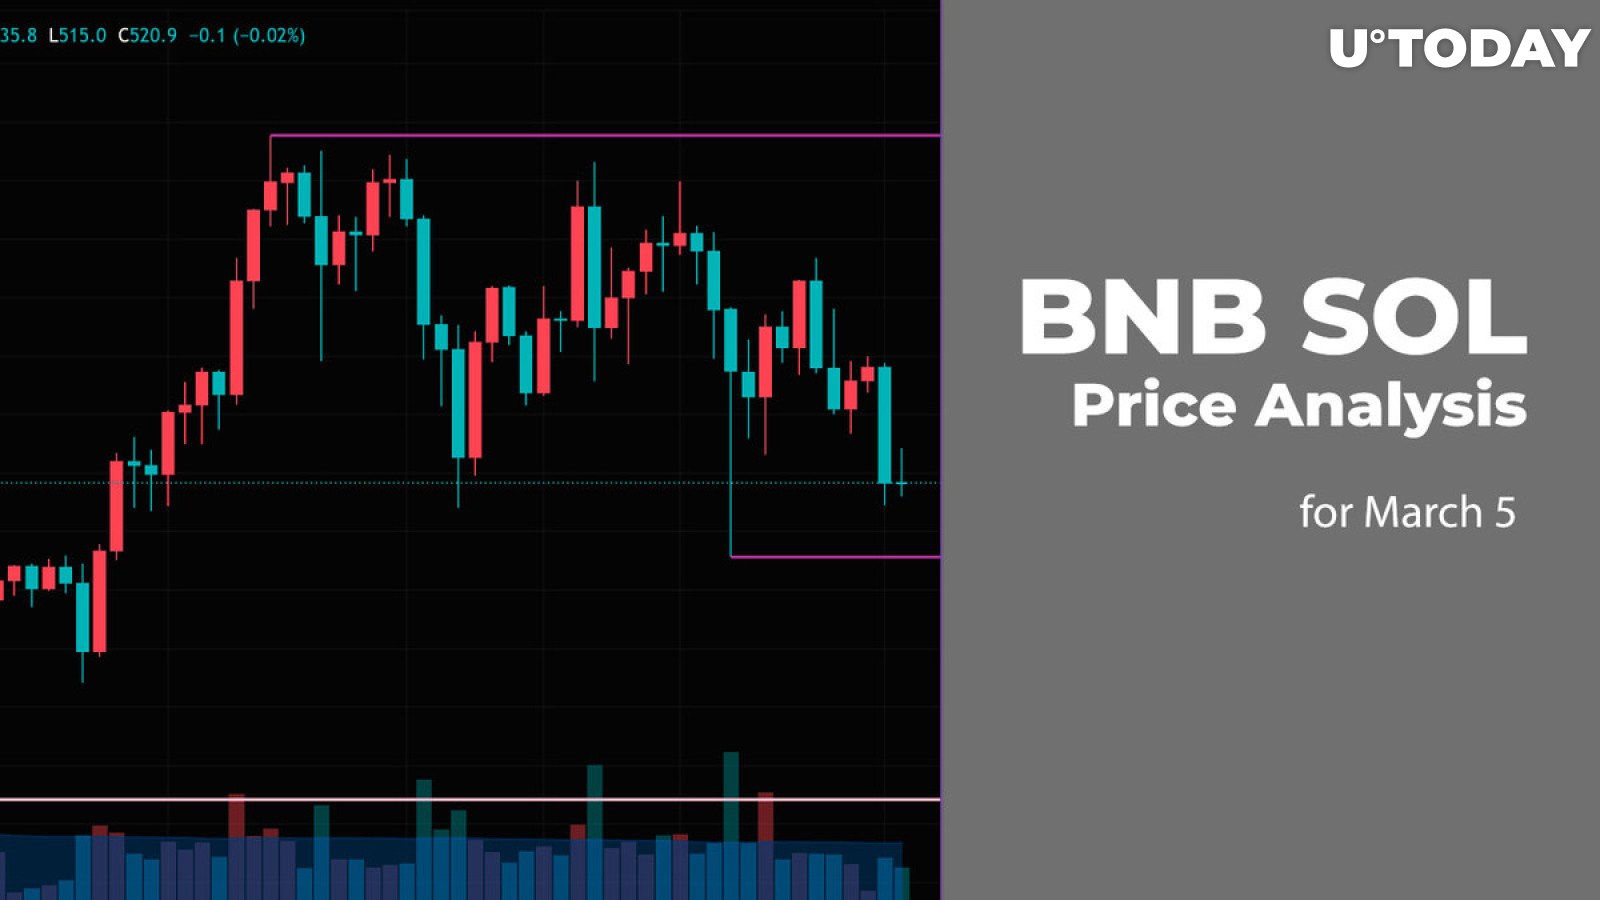 BNB and SOL Price Analysis for March 5